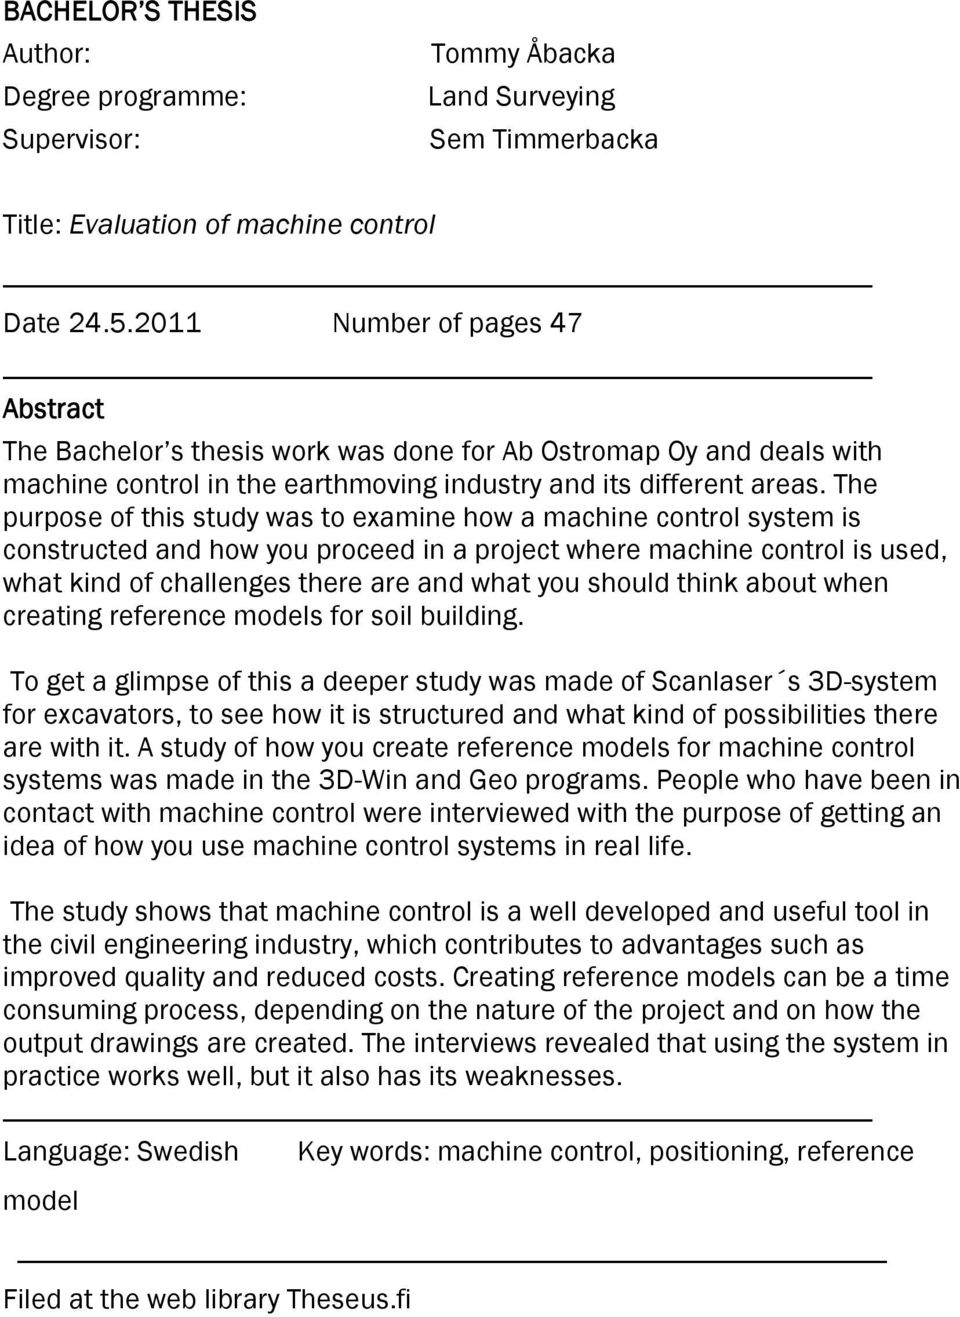 The purpose of this study was to examine how a machine control system is constructed and how you proceed in a project where machine control is used, what kind of challenges there are and what you